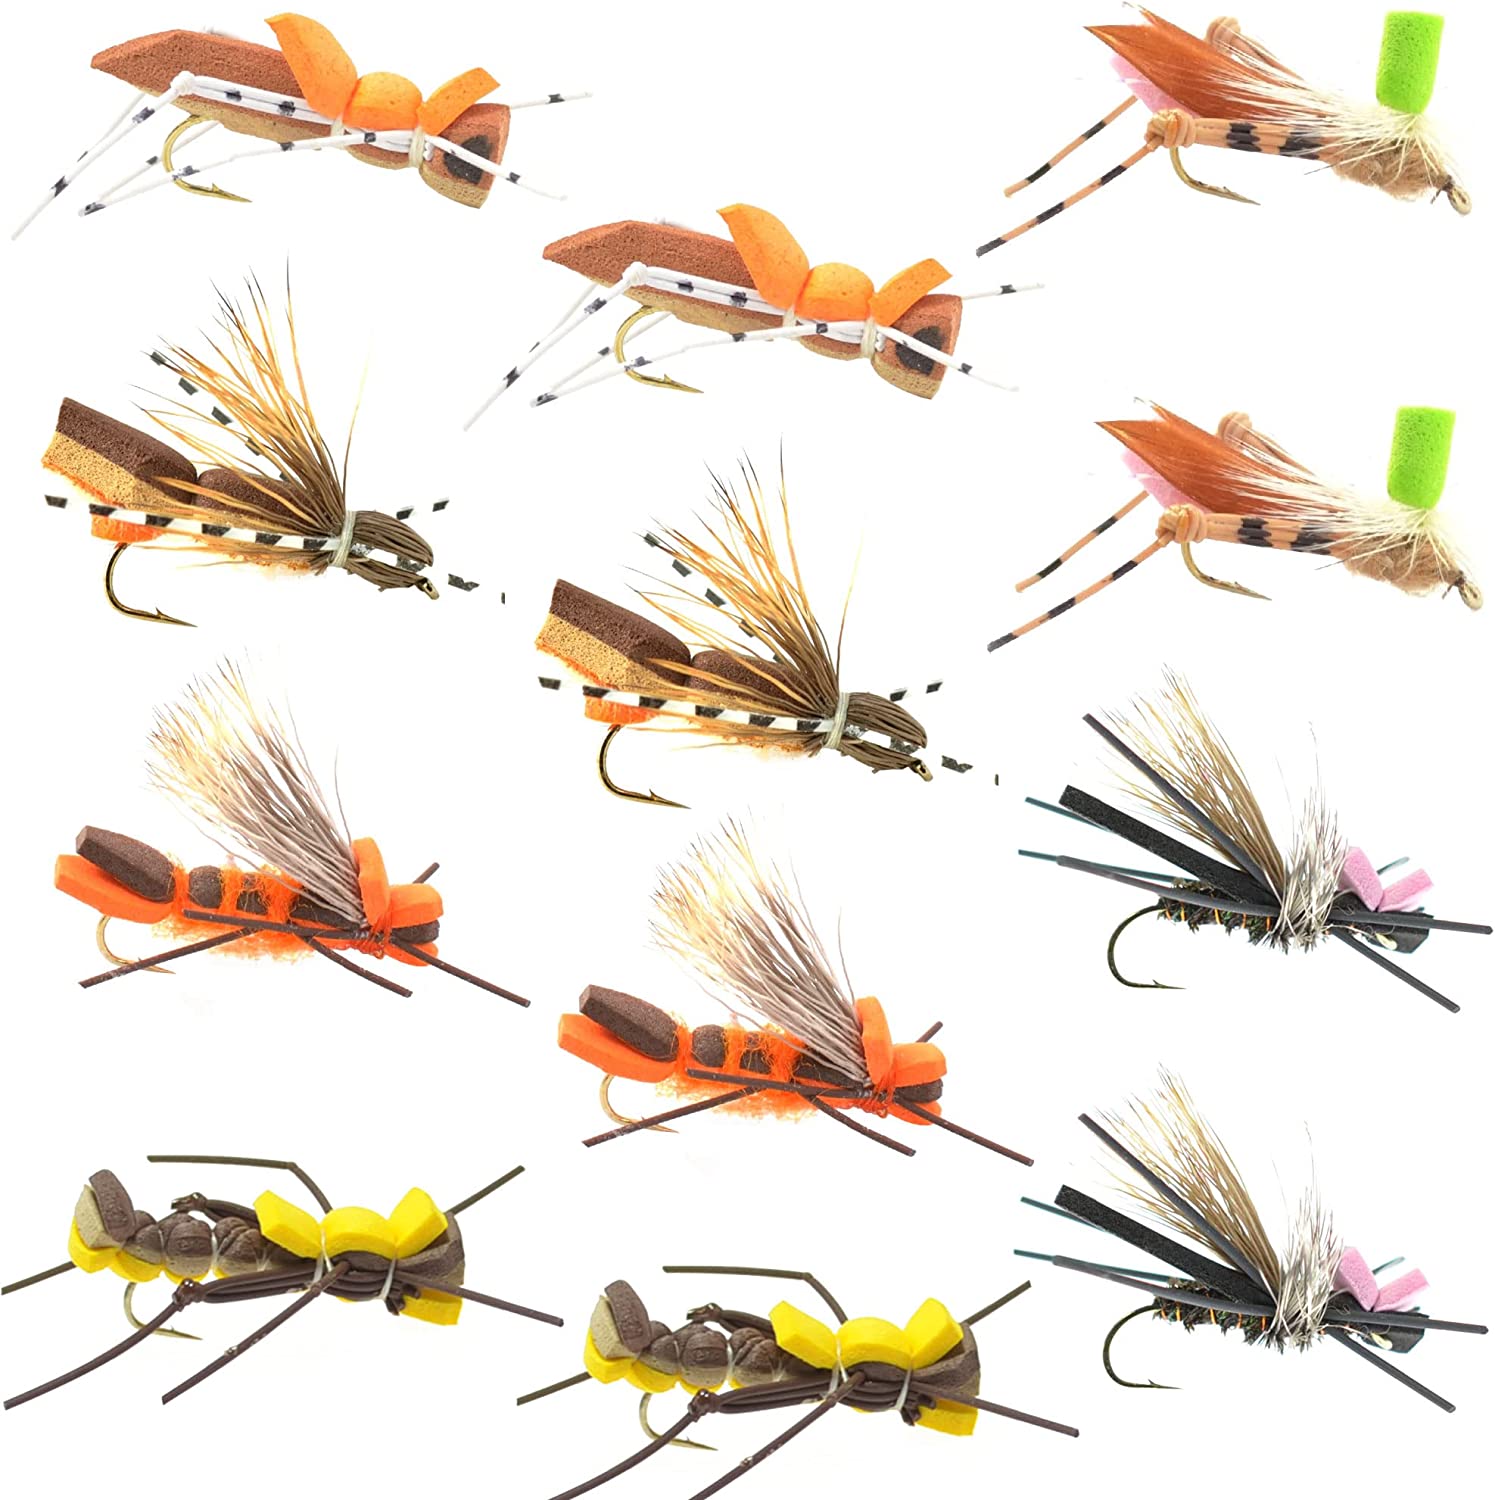 The Fly Fishing Place Foam Hopper Fly Fishing Flies Assortment - 12 Flies - 2 Each of 6 Grasshopper Dropper Hoppers Patterns with Fly Box